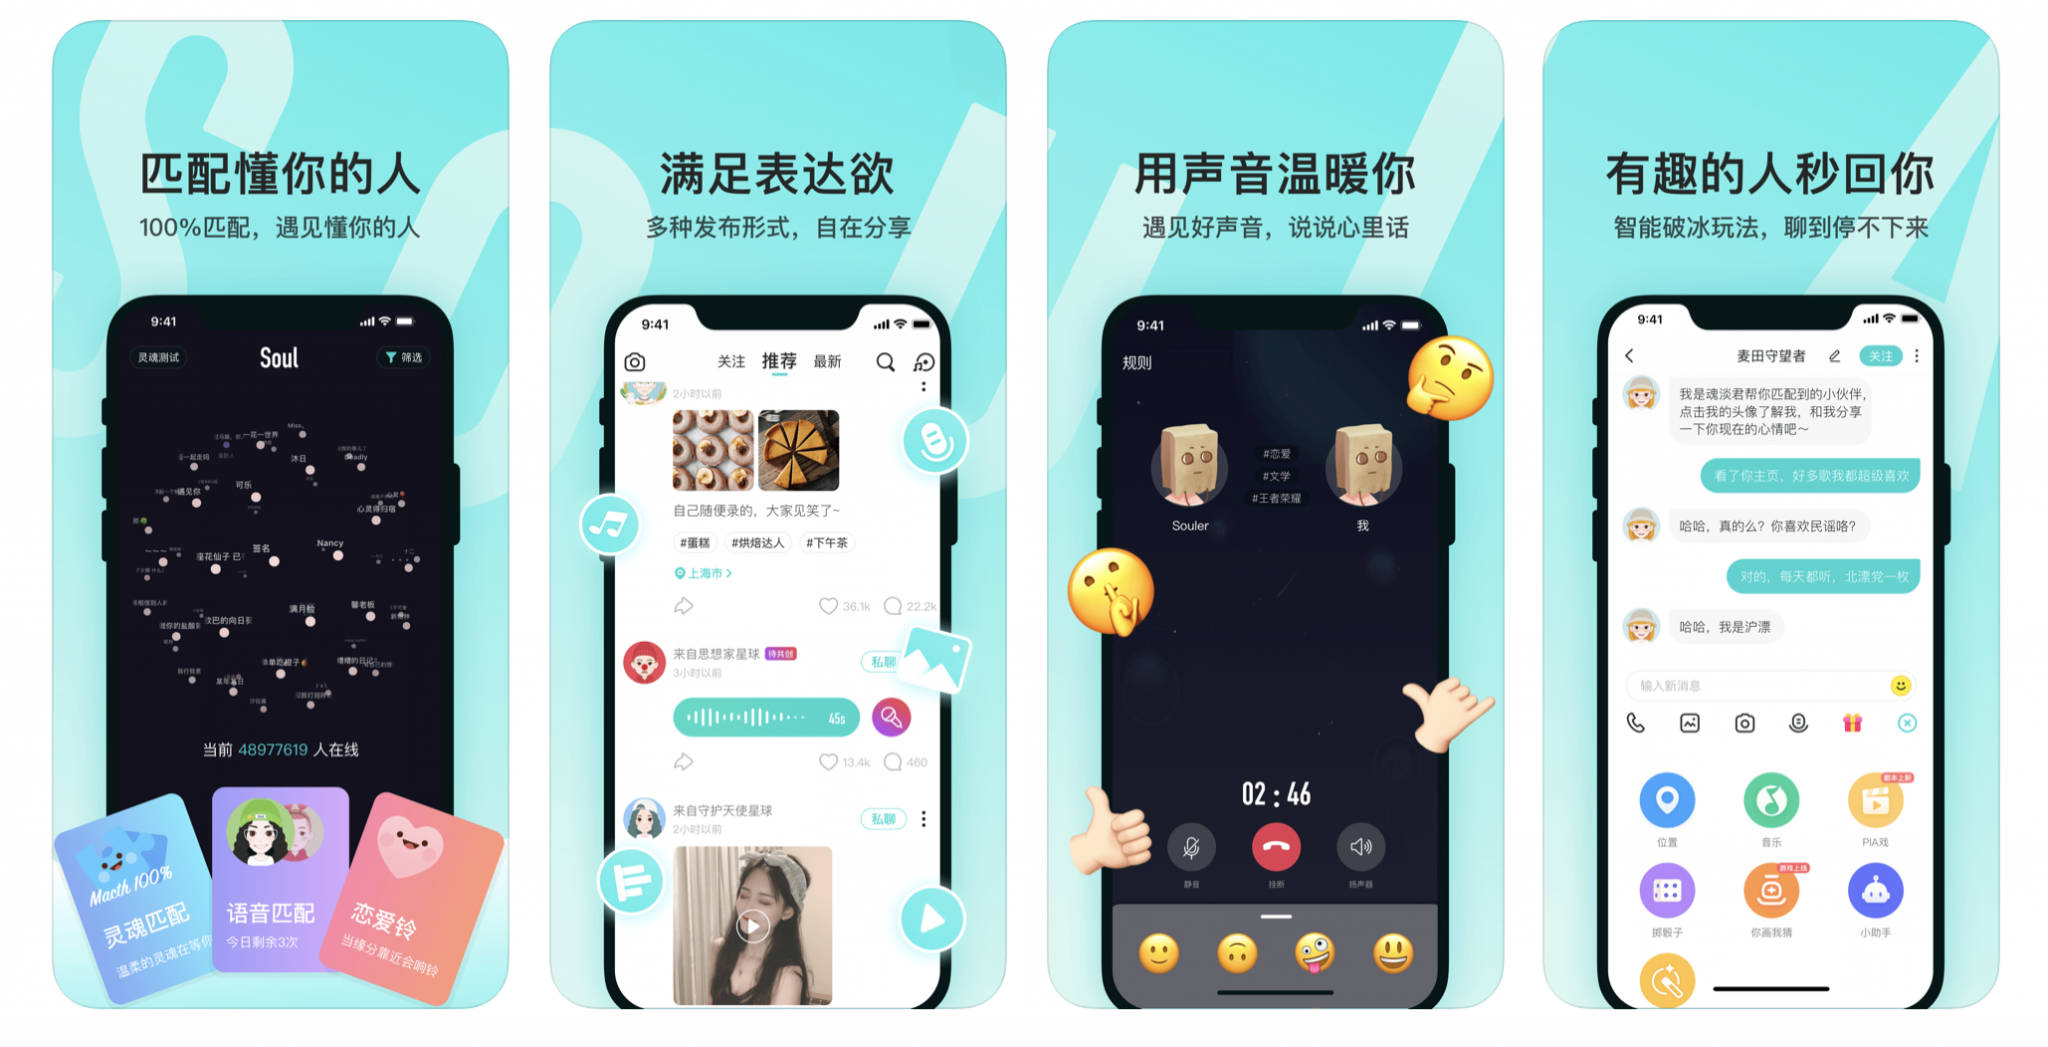 most popular dating apps in china